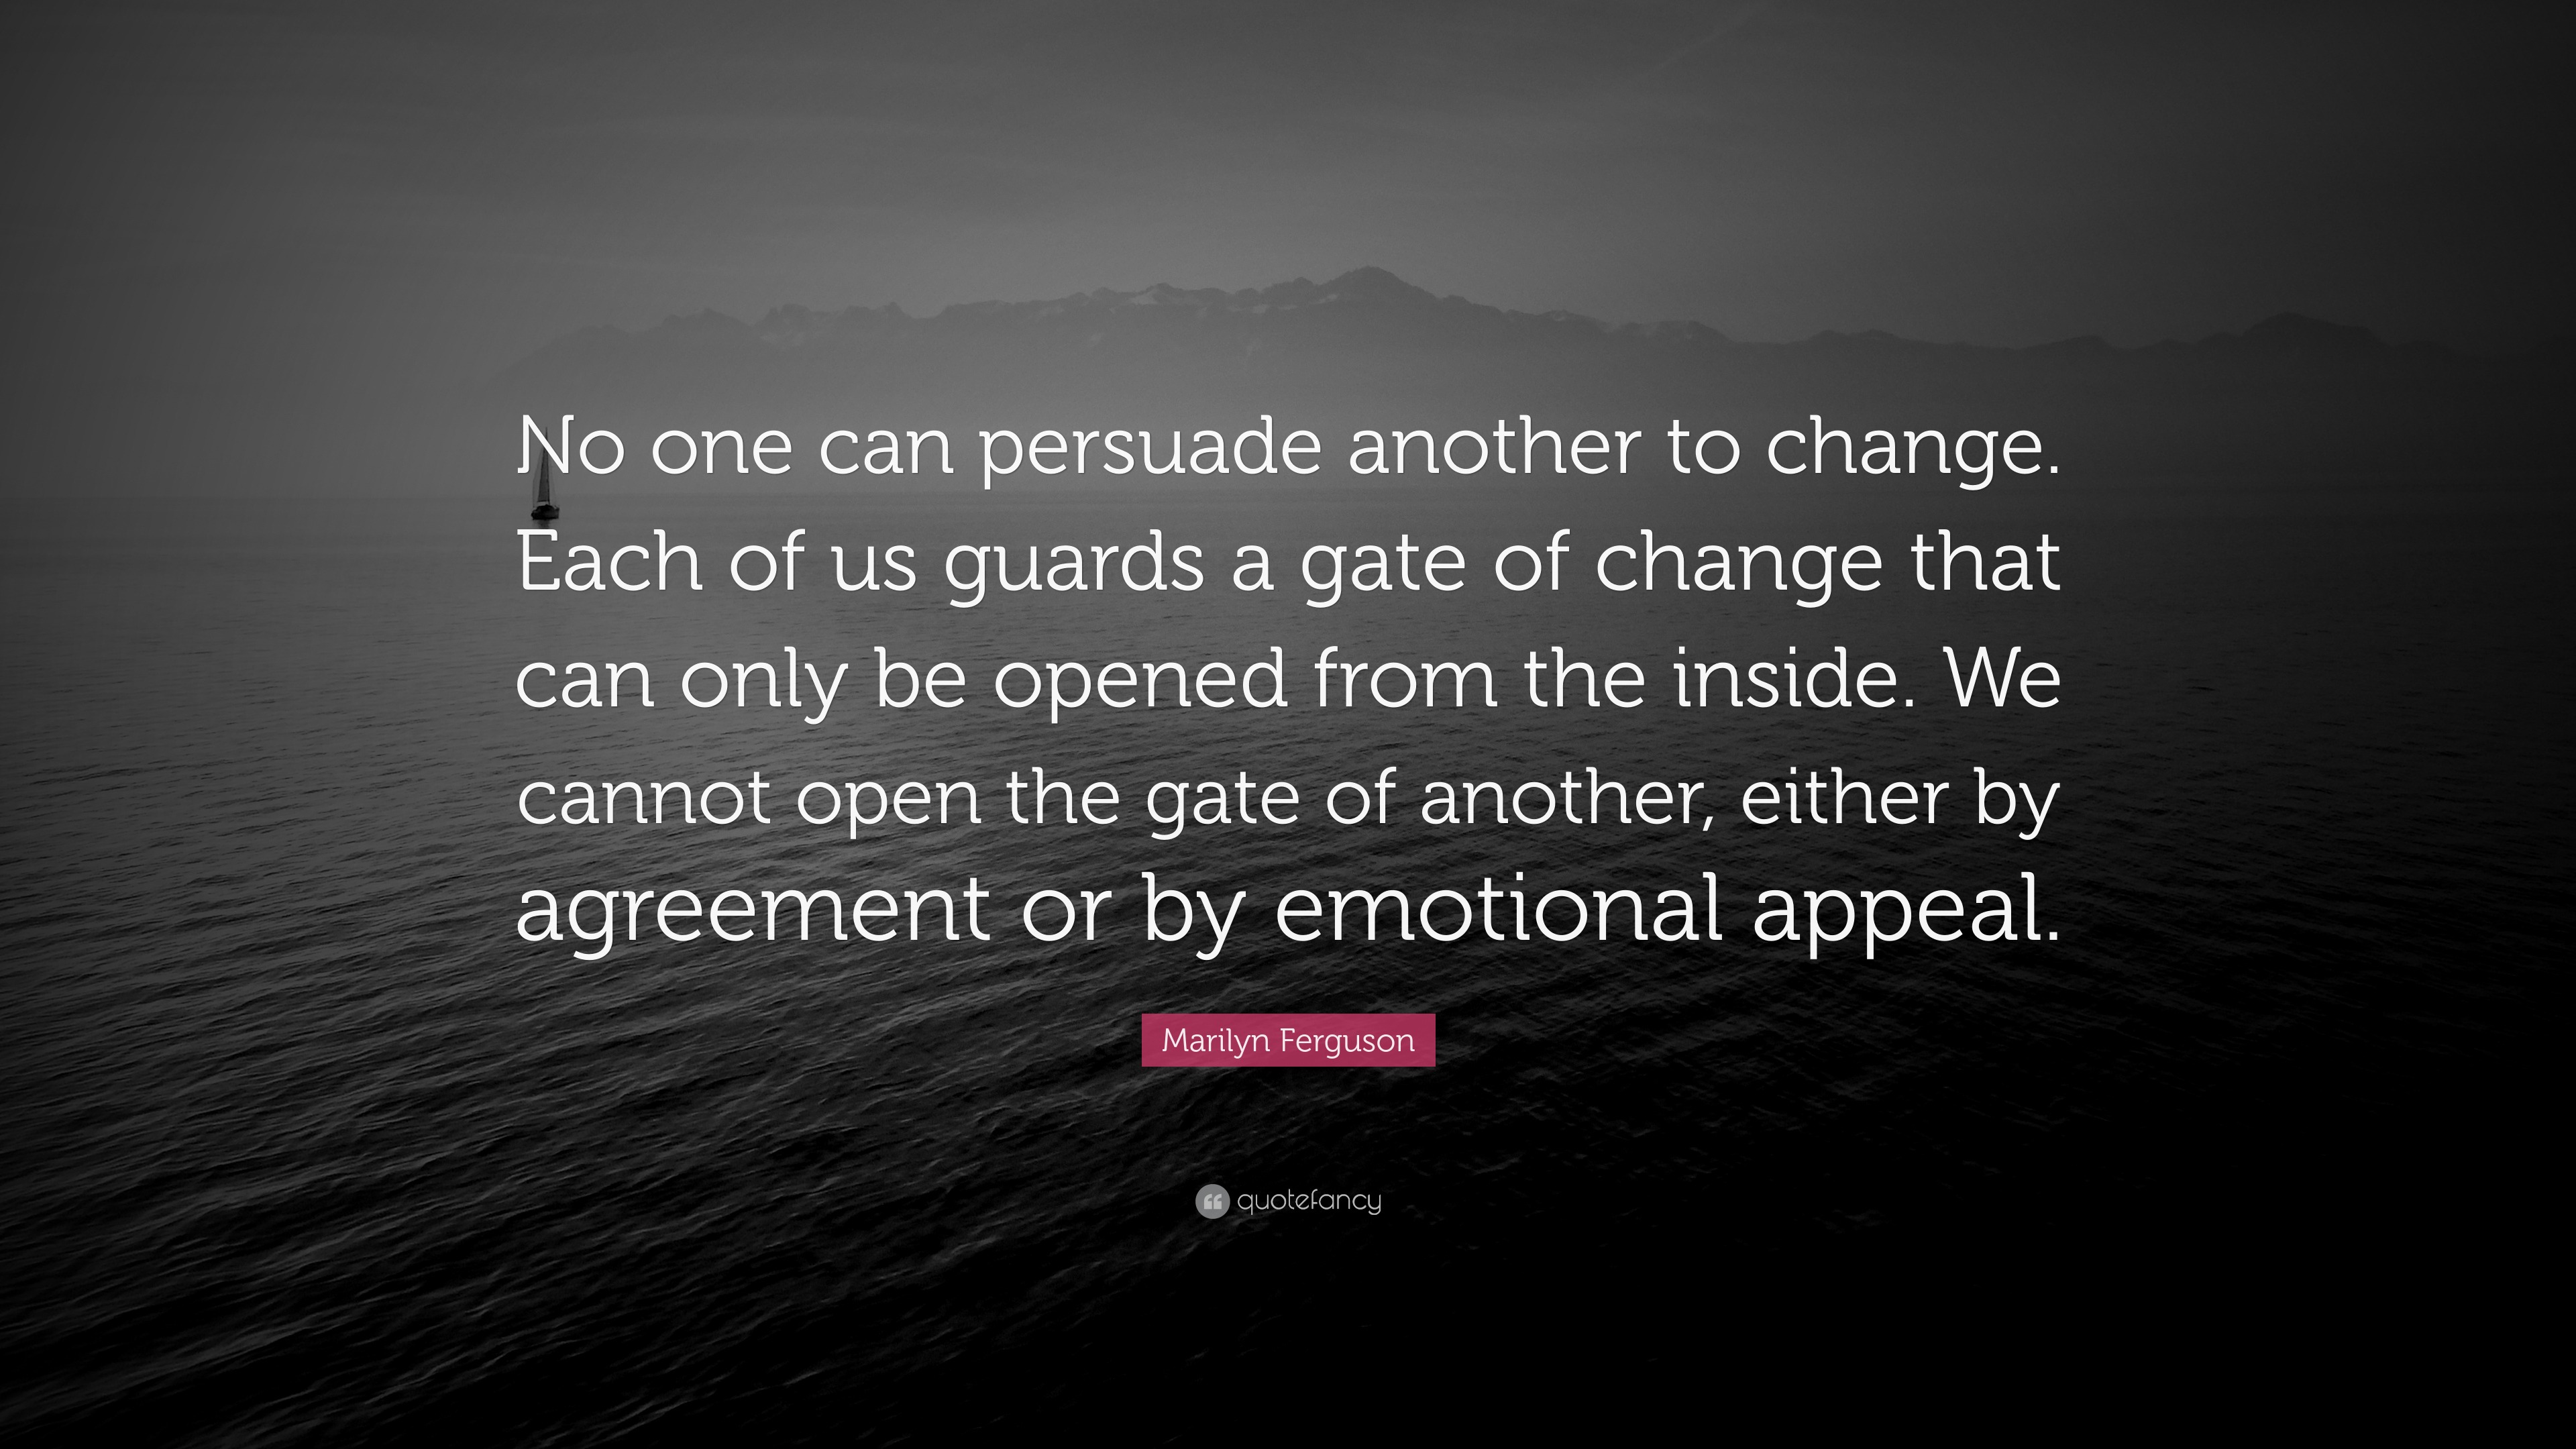 “No one can persuade another to change. Each of us guards a gate of change that can only be opened from the inside. We cannot open the gate of another, either by agreement or by emotional appeal.”